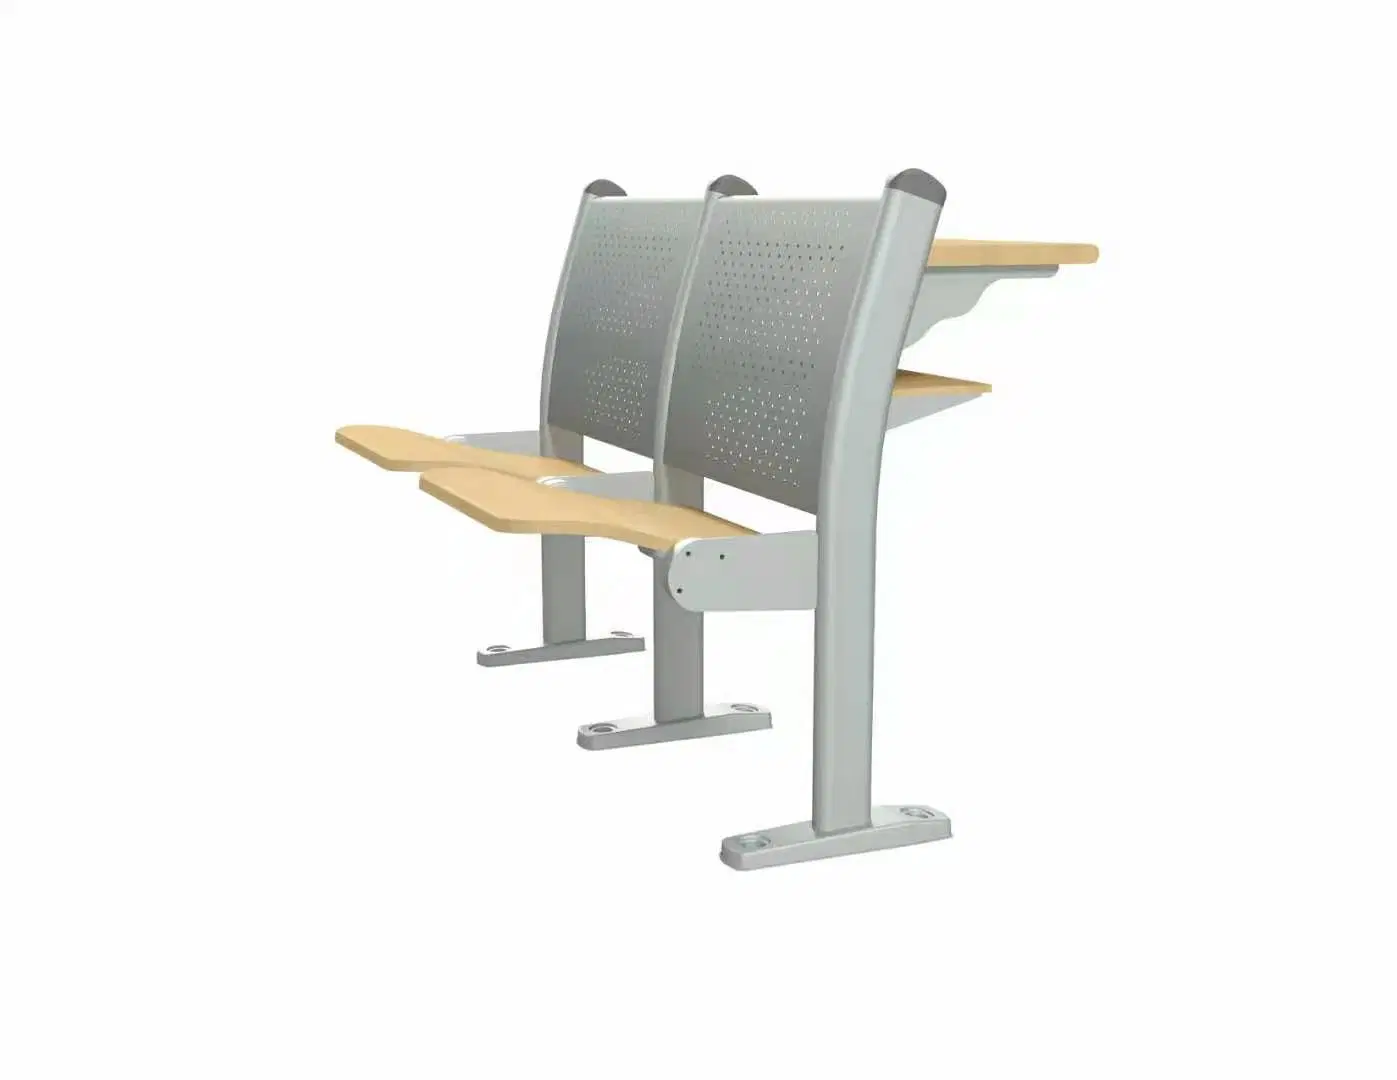 University School Classroom Student Lecture Room Desk and Chair Set